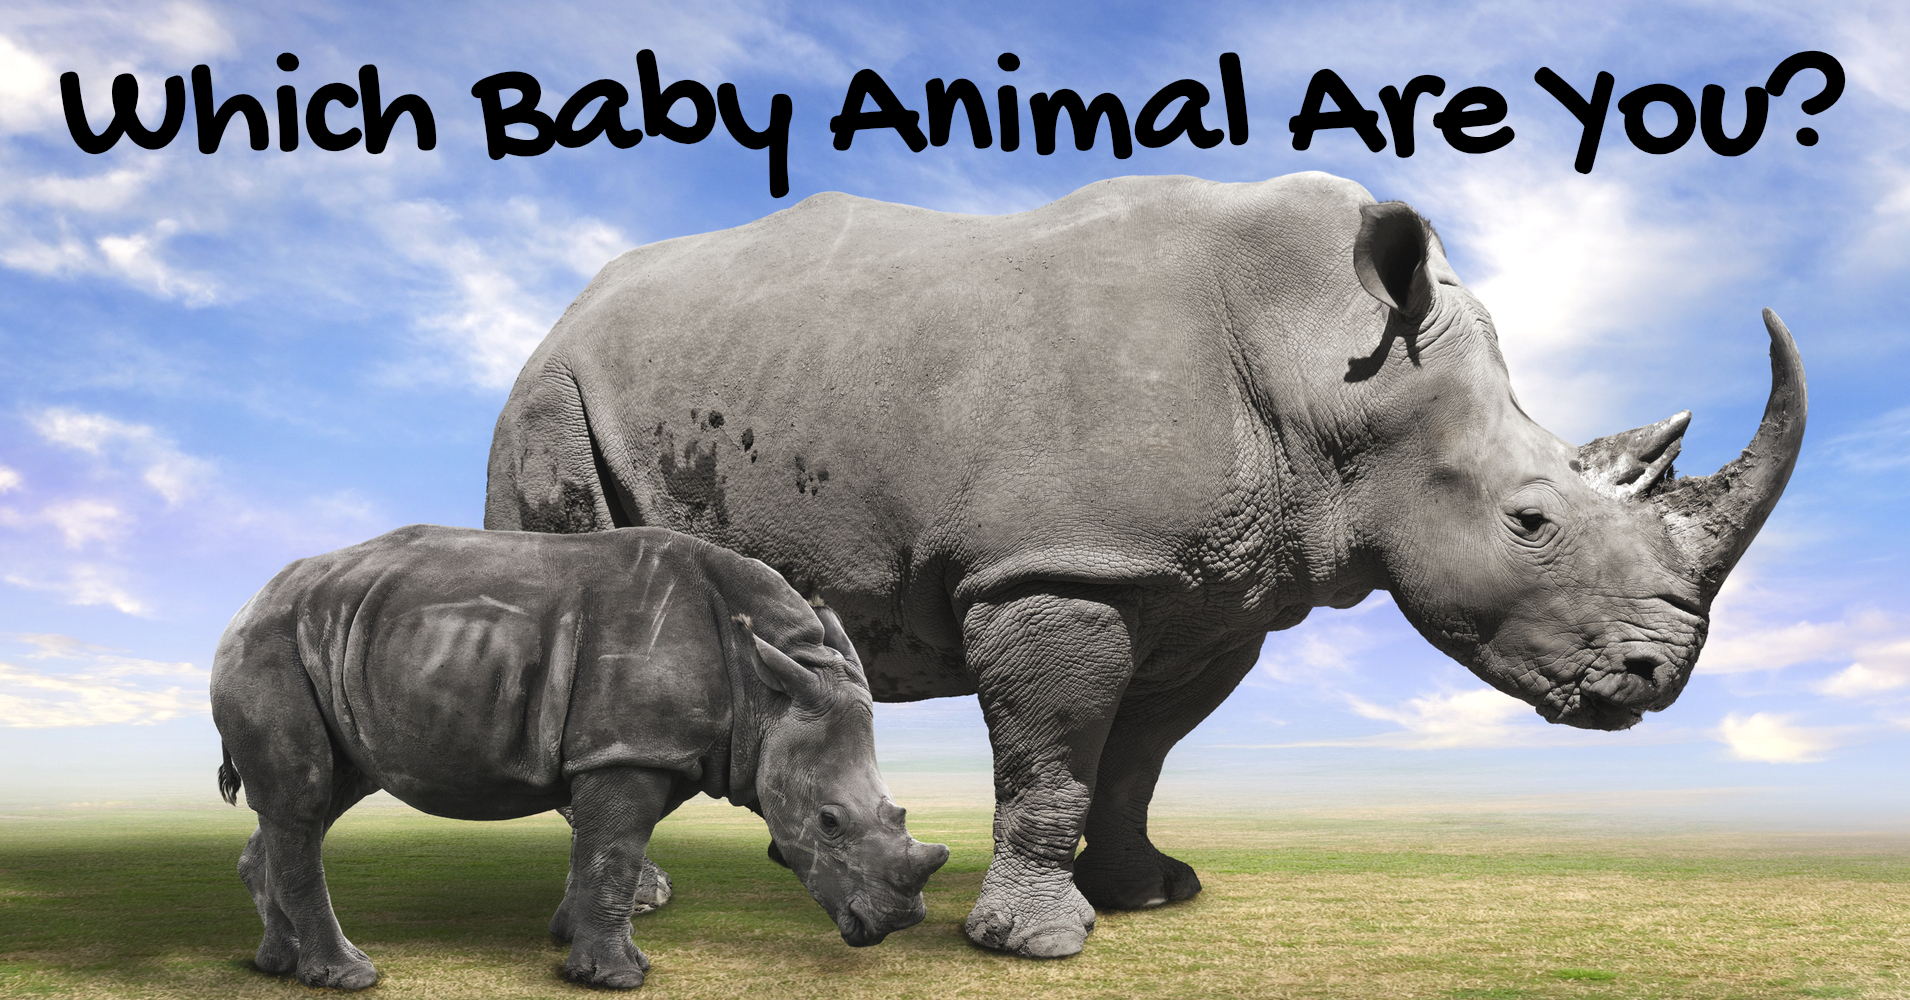 Which Baby Animal Are You? - Quiz 